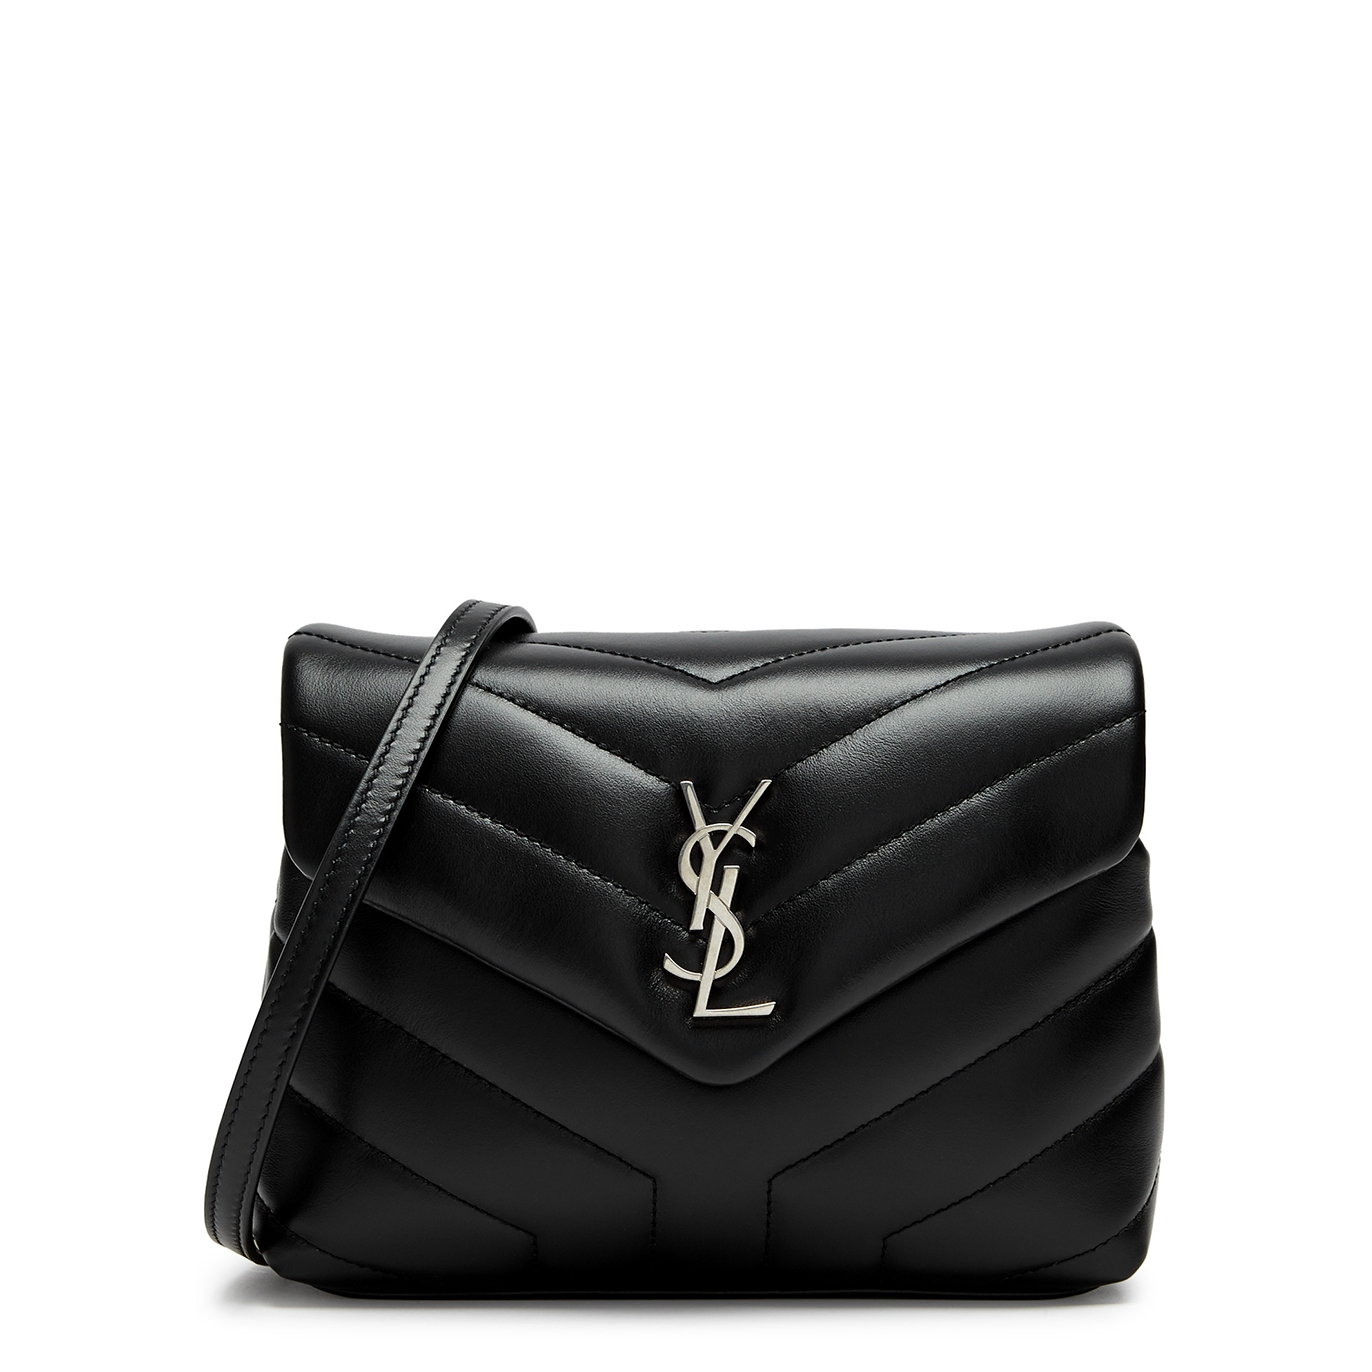 Saint Laurent Loulou Toy Quilted Leather Cross-body Bag - Black